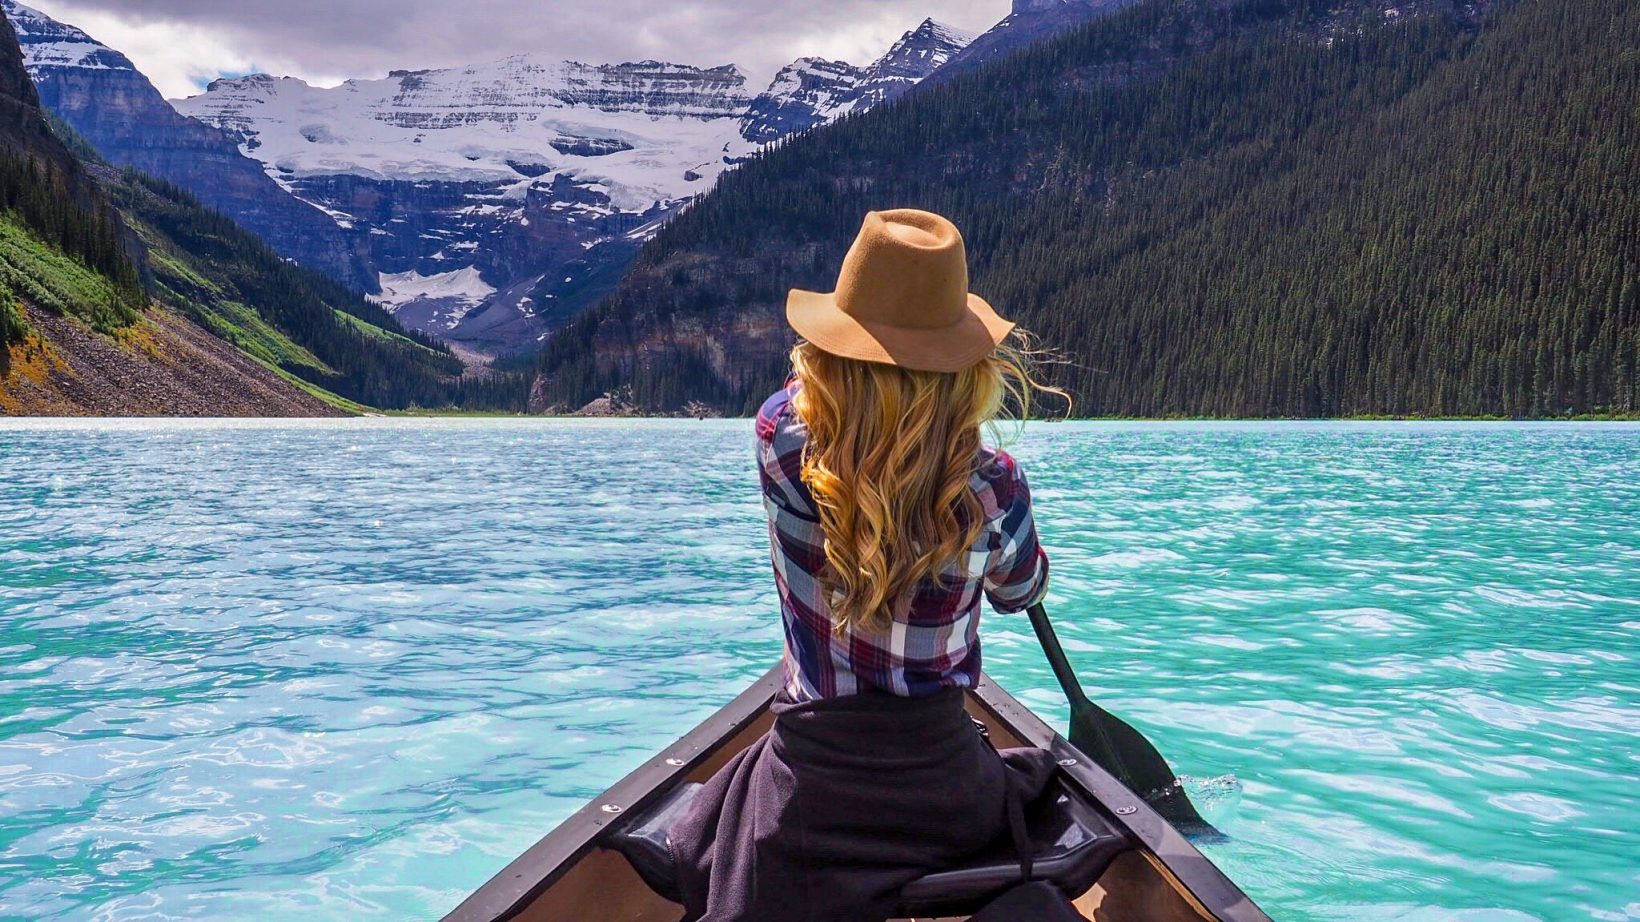 18 photos that prove Banff is heaven on Earth - hungryfortravels